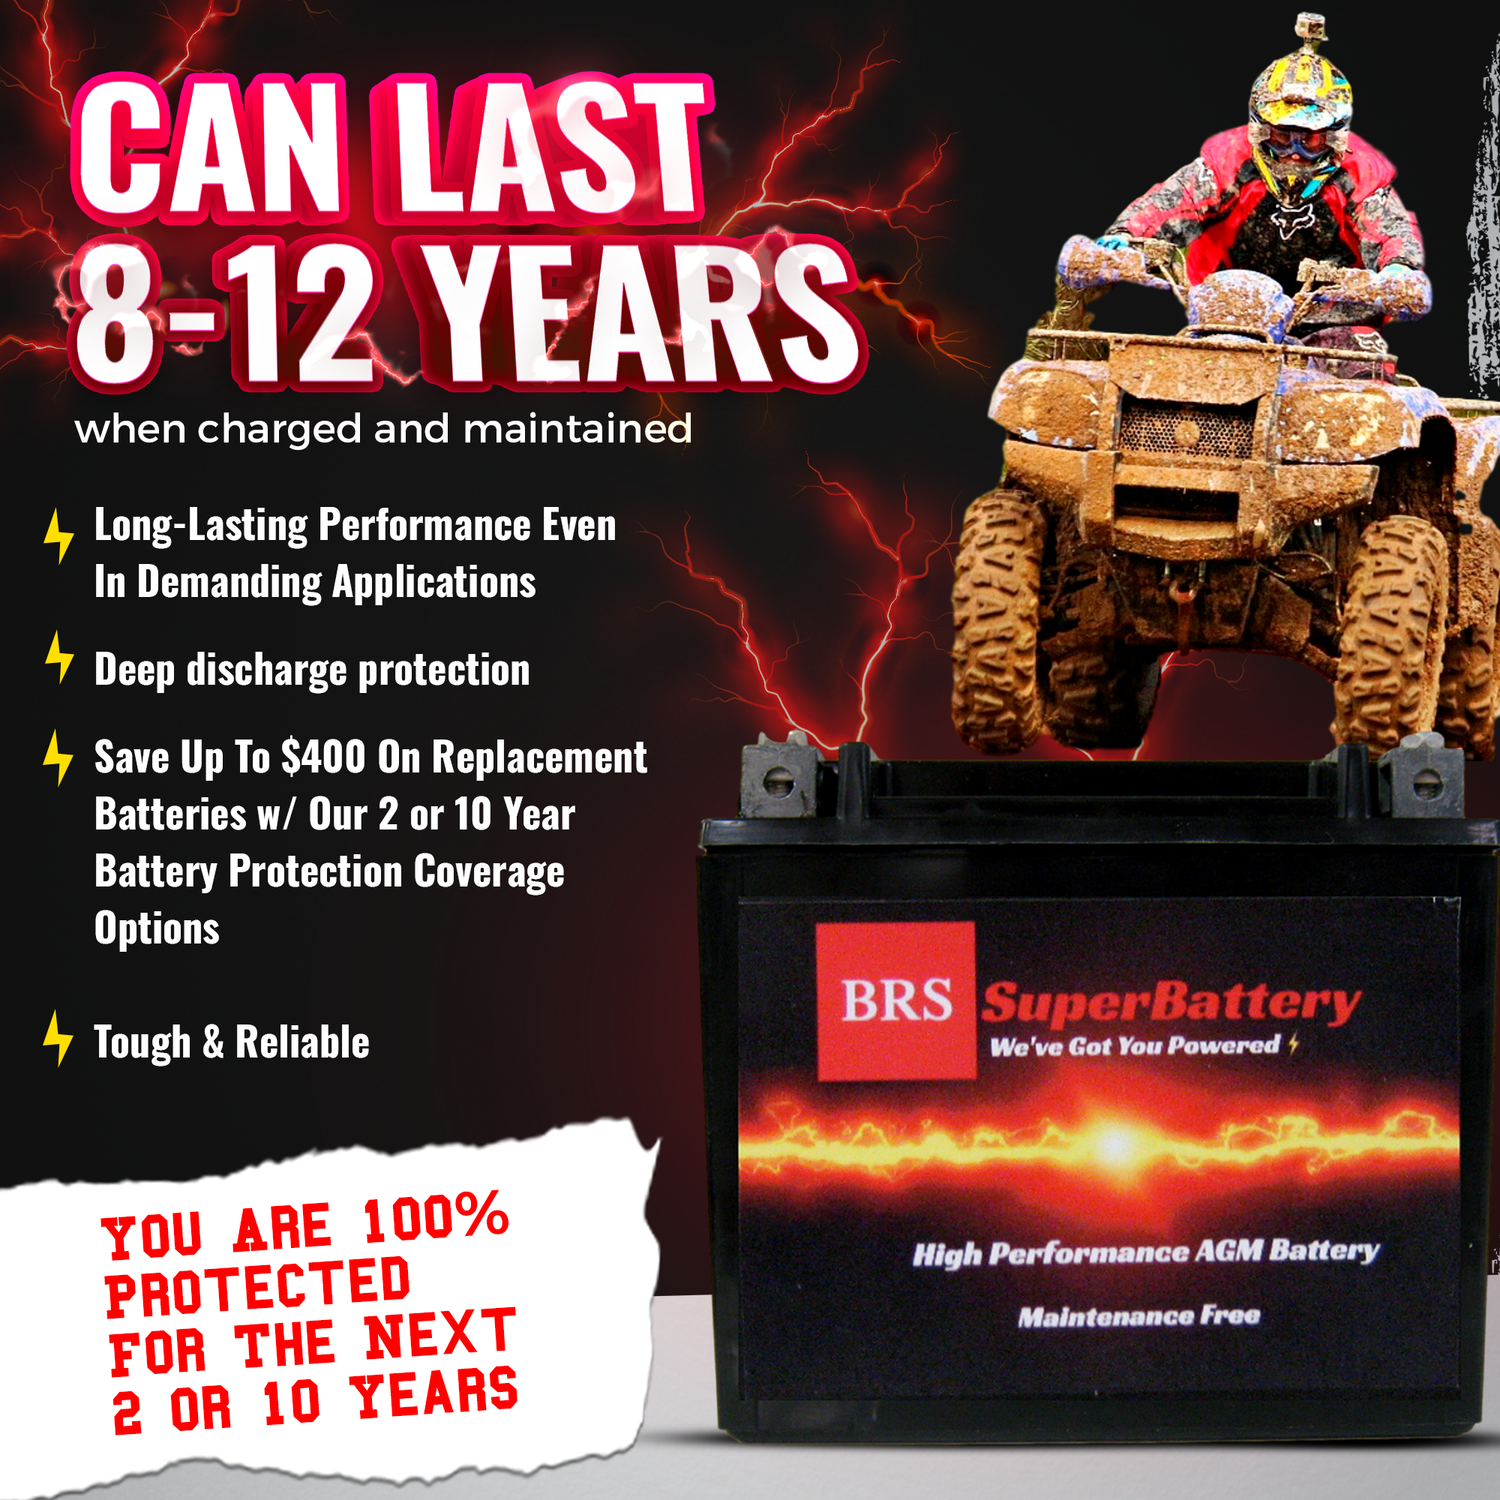 High Performance BRS12-BS 10 Year Battery & Smart Charger / Maintainer Combo Bundle Kit 12v Sealed AGM PowerSports Battery - BRS Super Battery